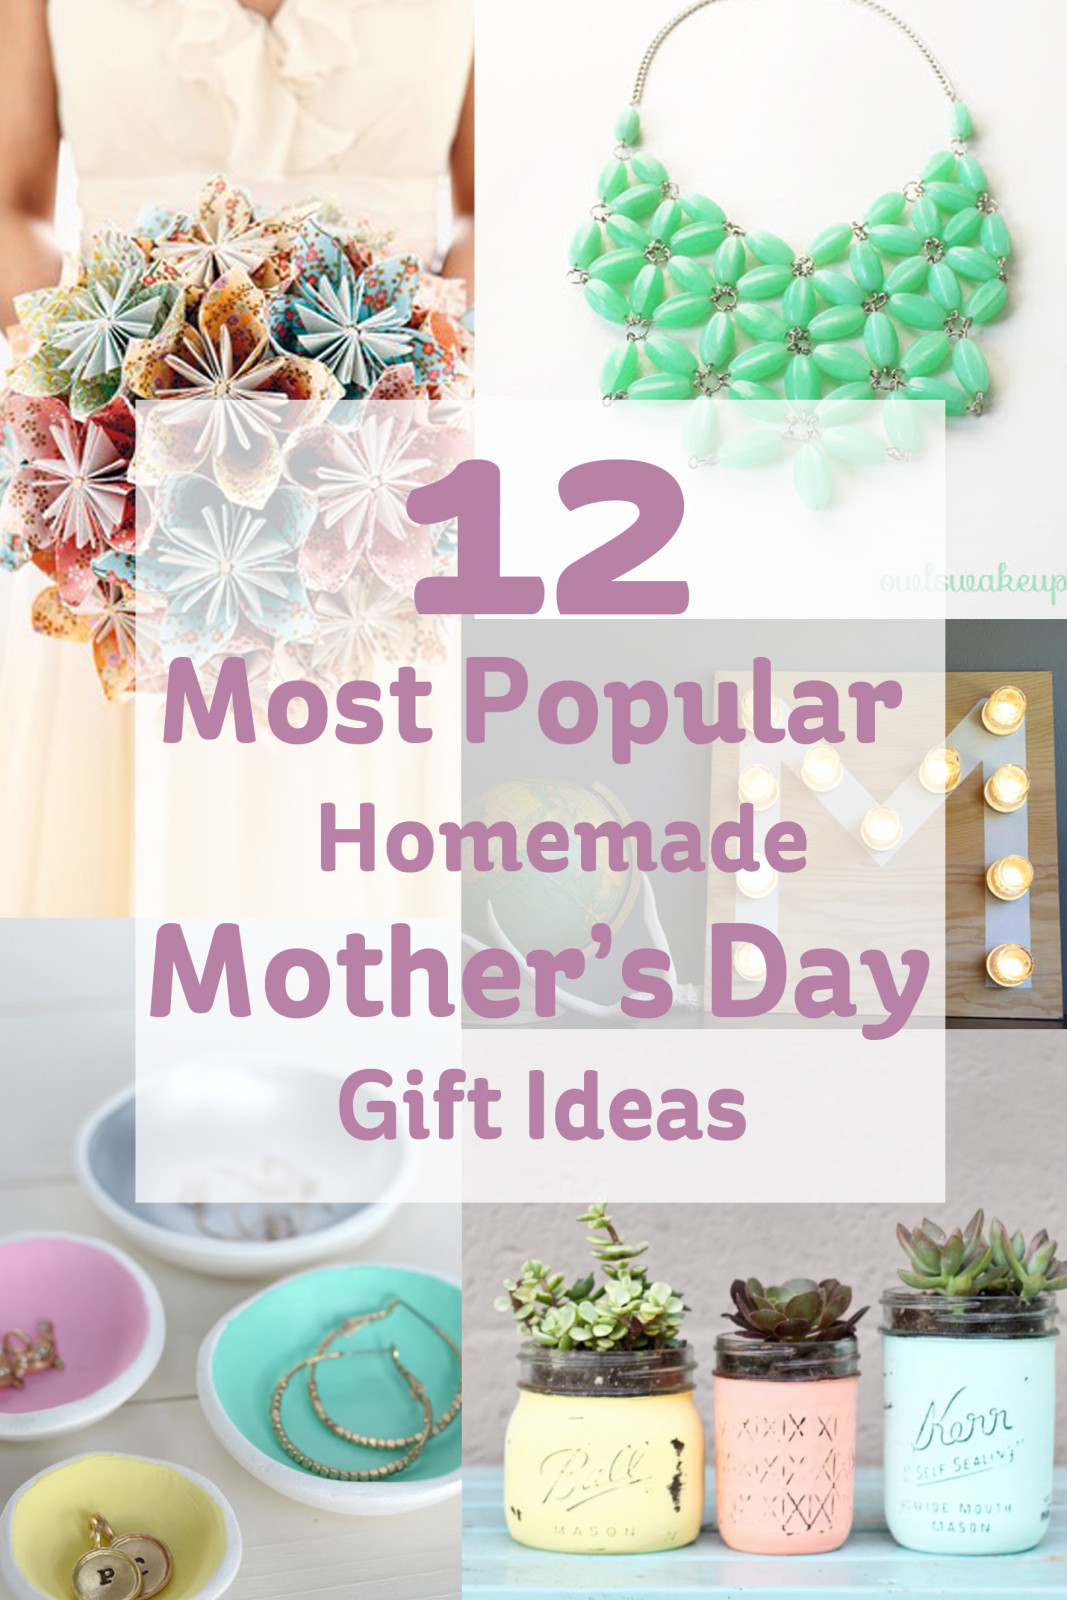 Mother Day Gift Ideas Handmade
 12 Most Popular Homemade Mother s Day Gift Ideas